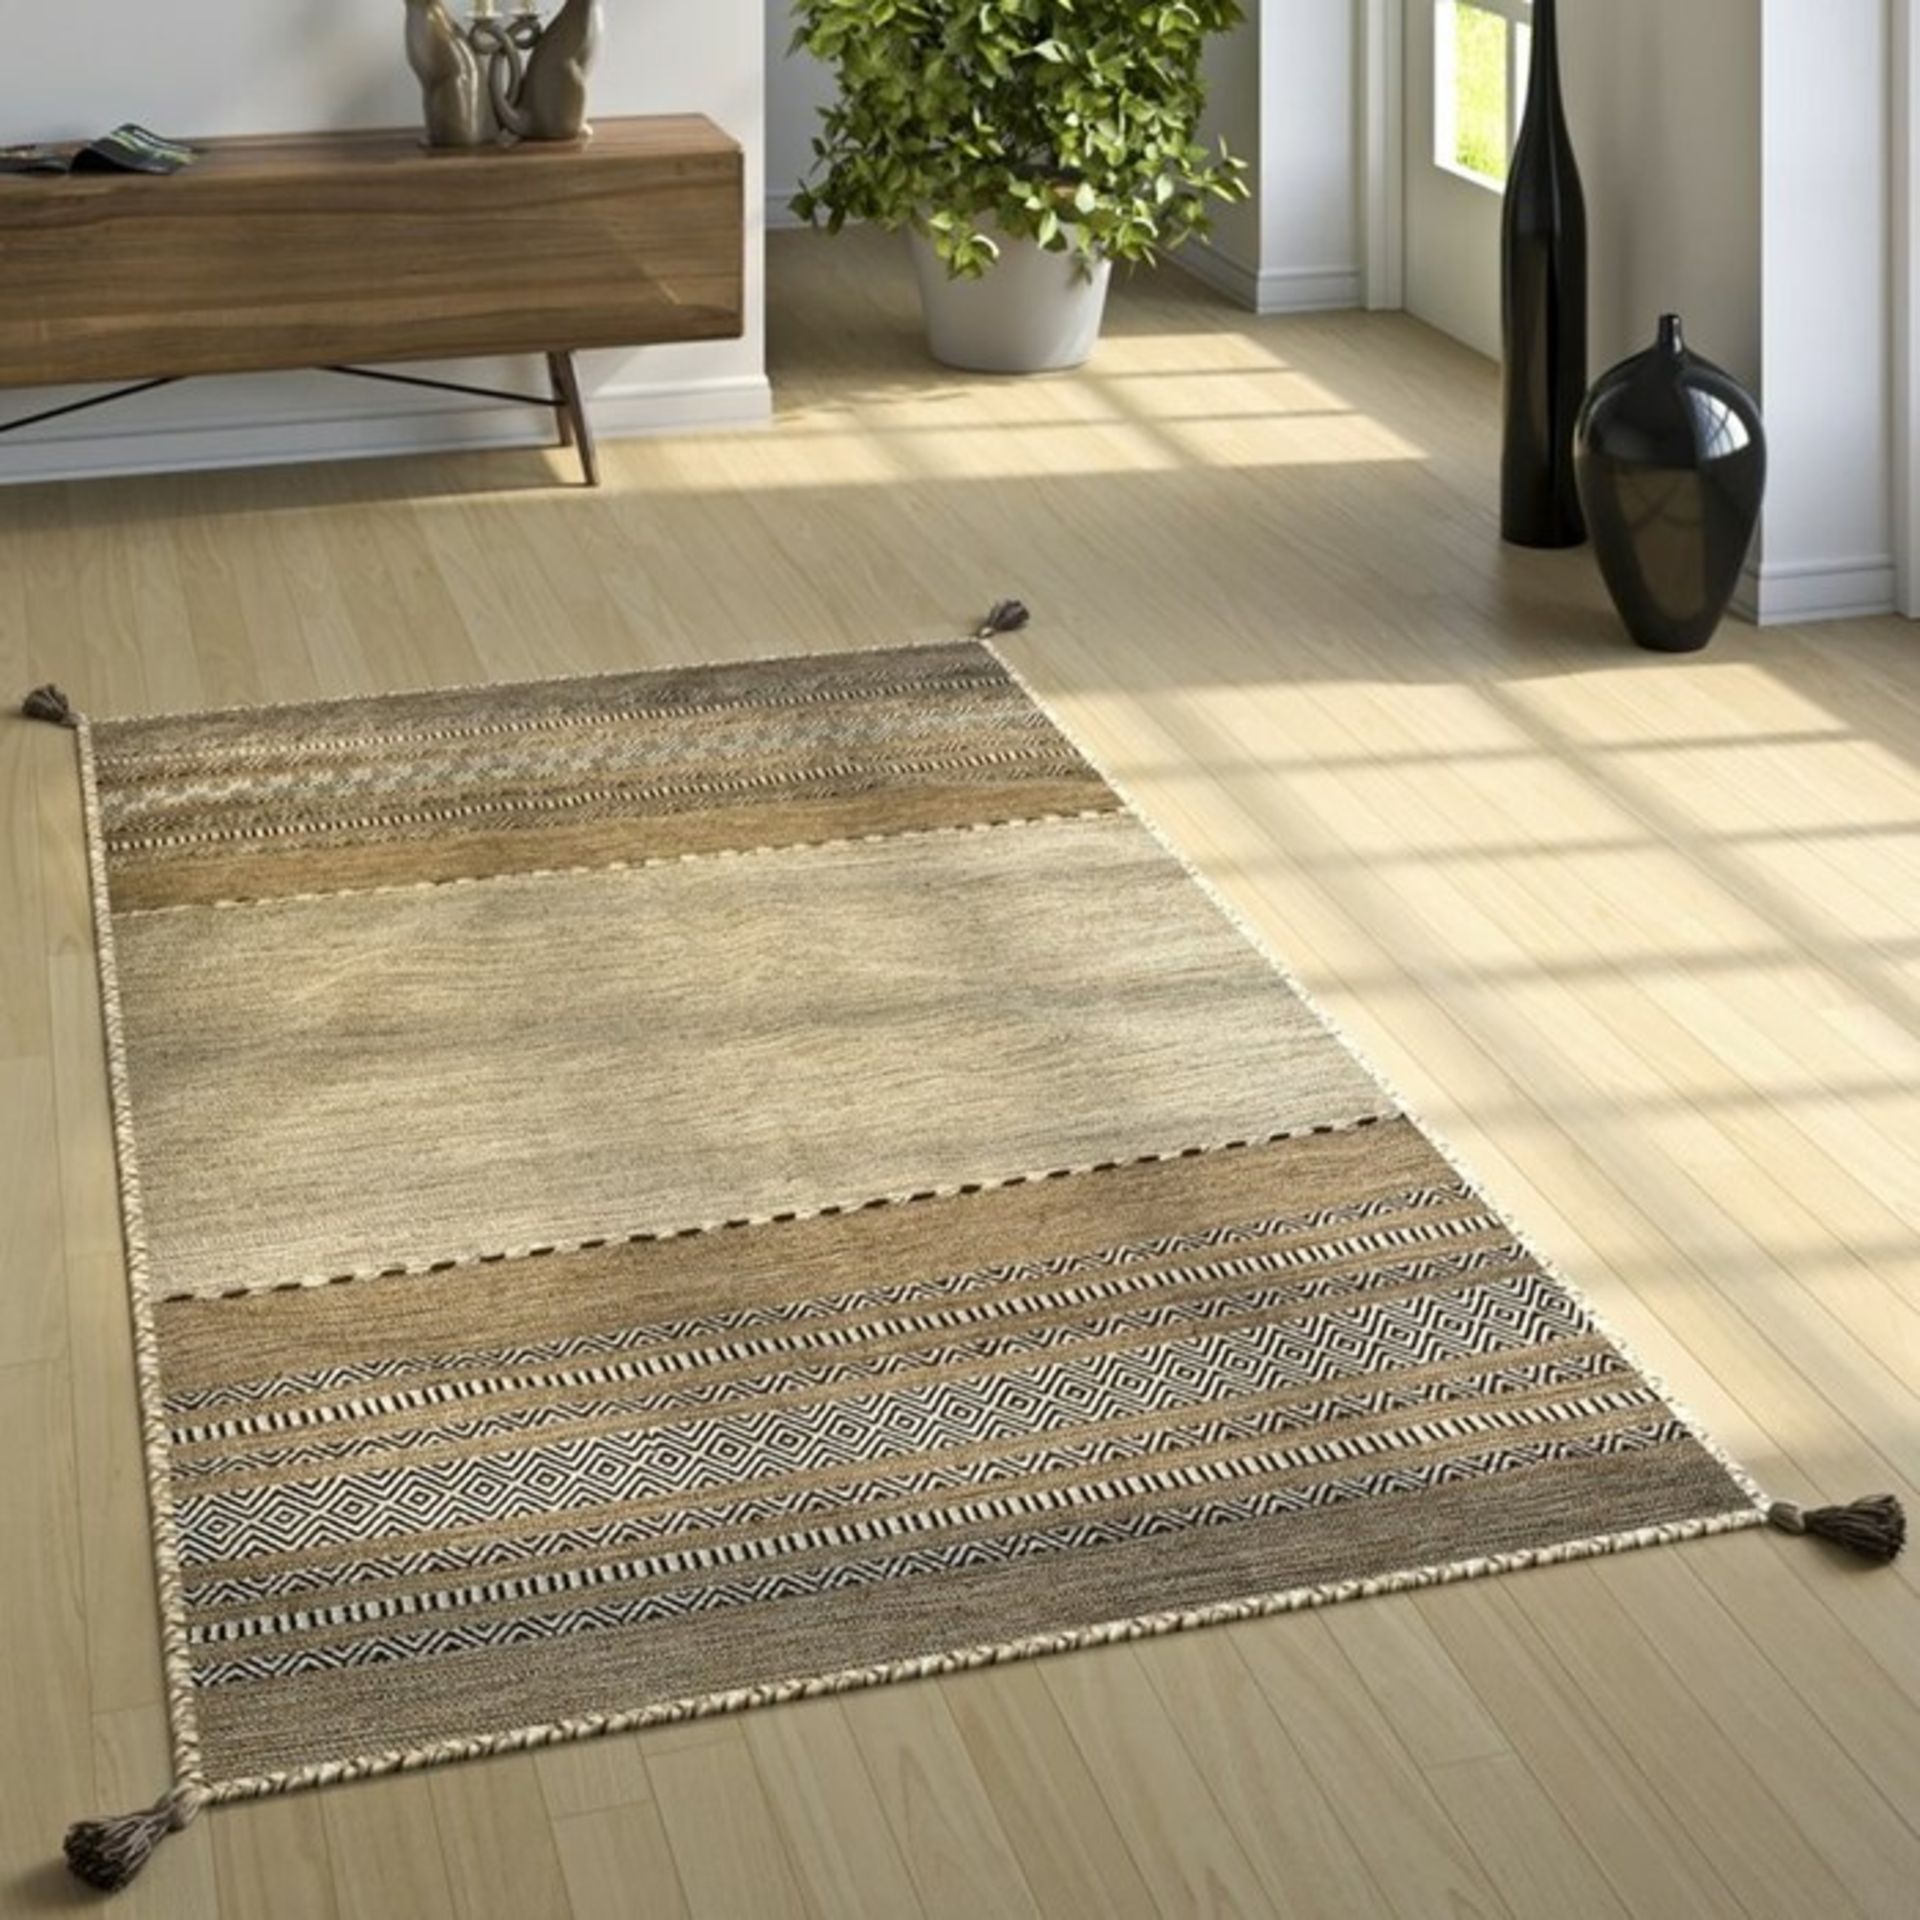 World Menagerie, Earby Handmade Kilim Cotton Beige Rug RRP £109.99 (ALAS6620 - 18699/37) - Image 2 of 2